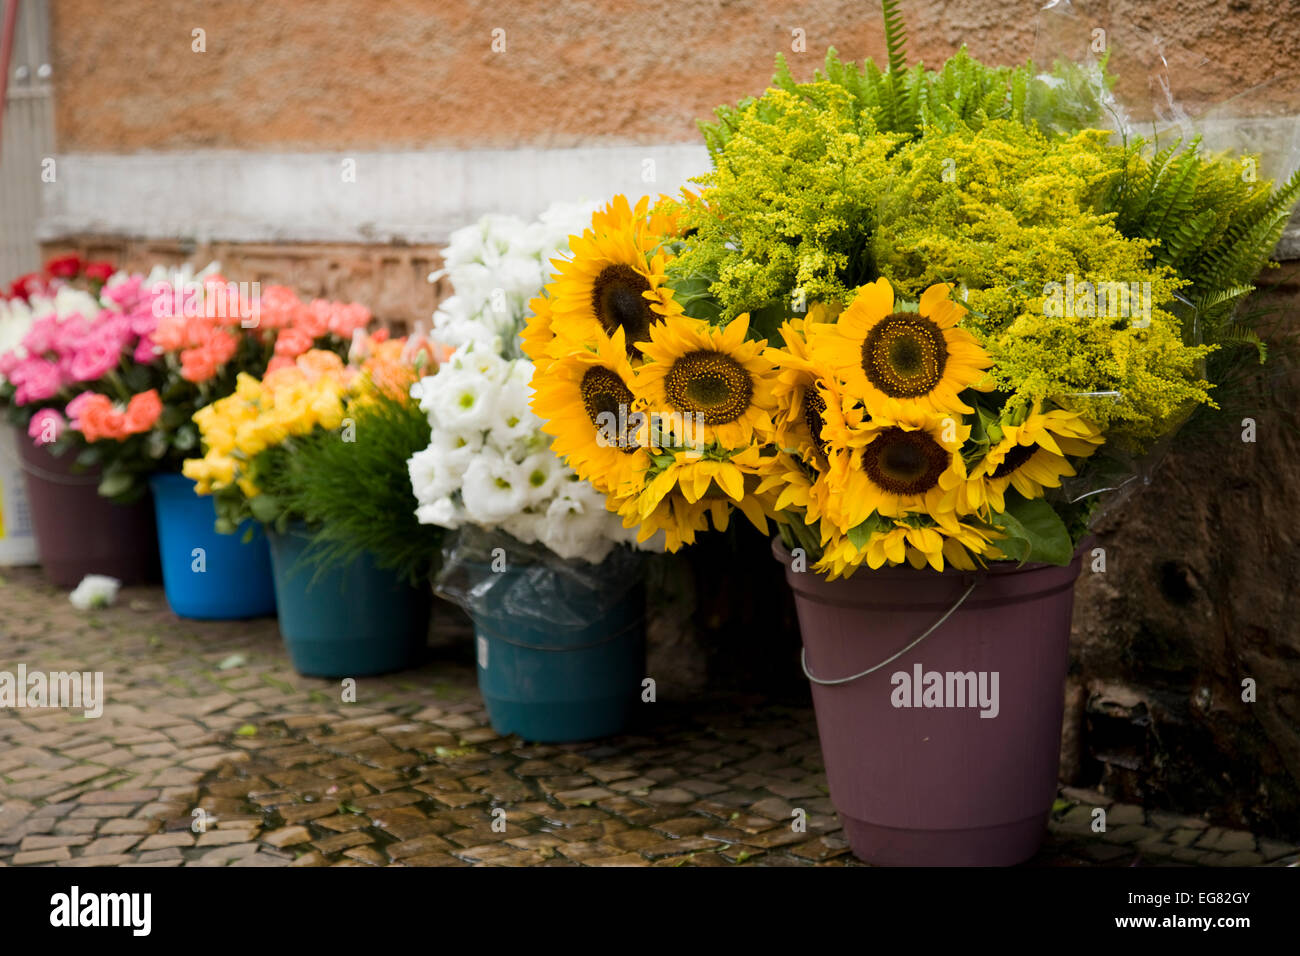 Bunches of flowers for sale on the streets of Sao Paulo, Brazil. Sunflowers are in sharp focus with roses in background. Stock Photo